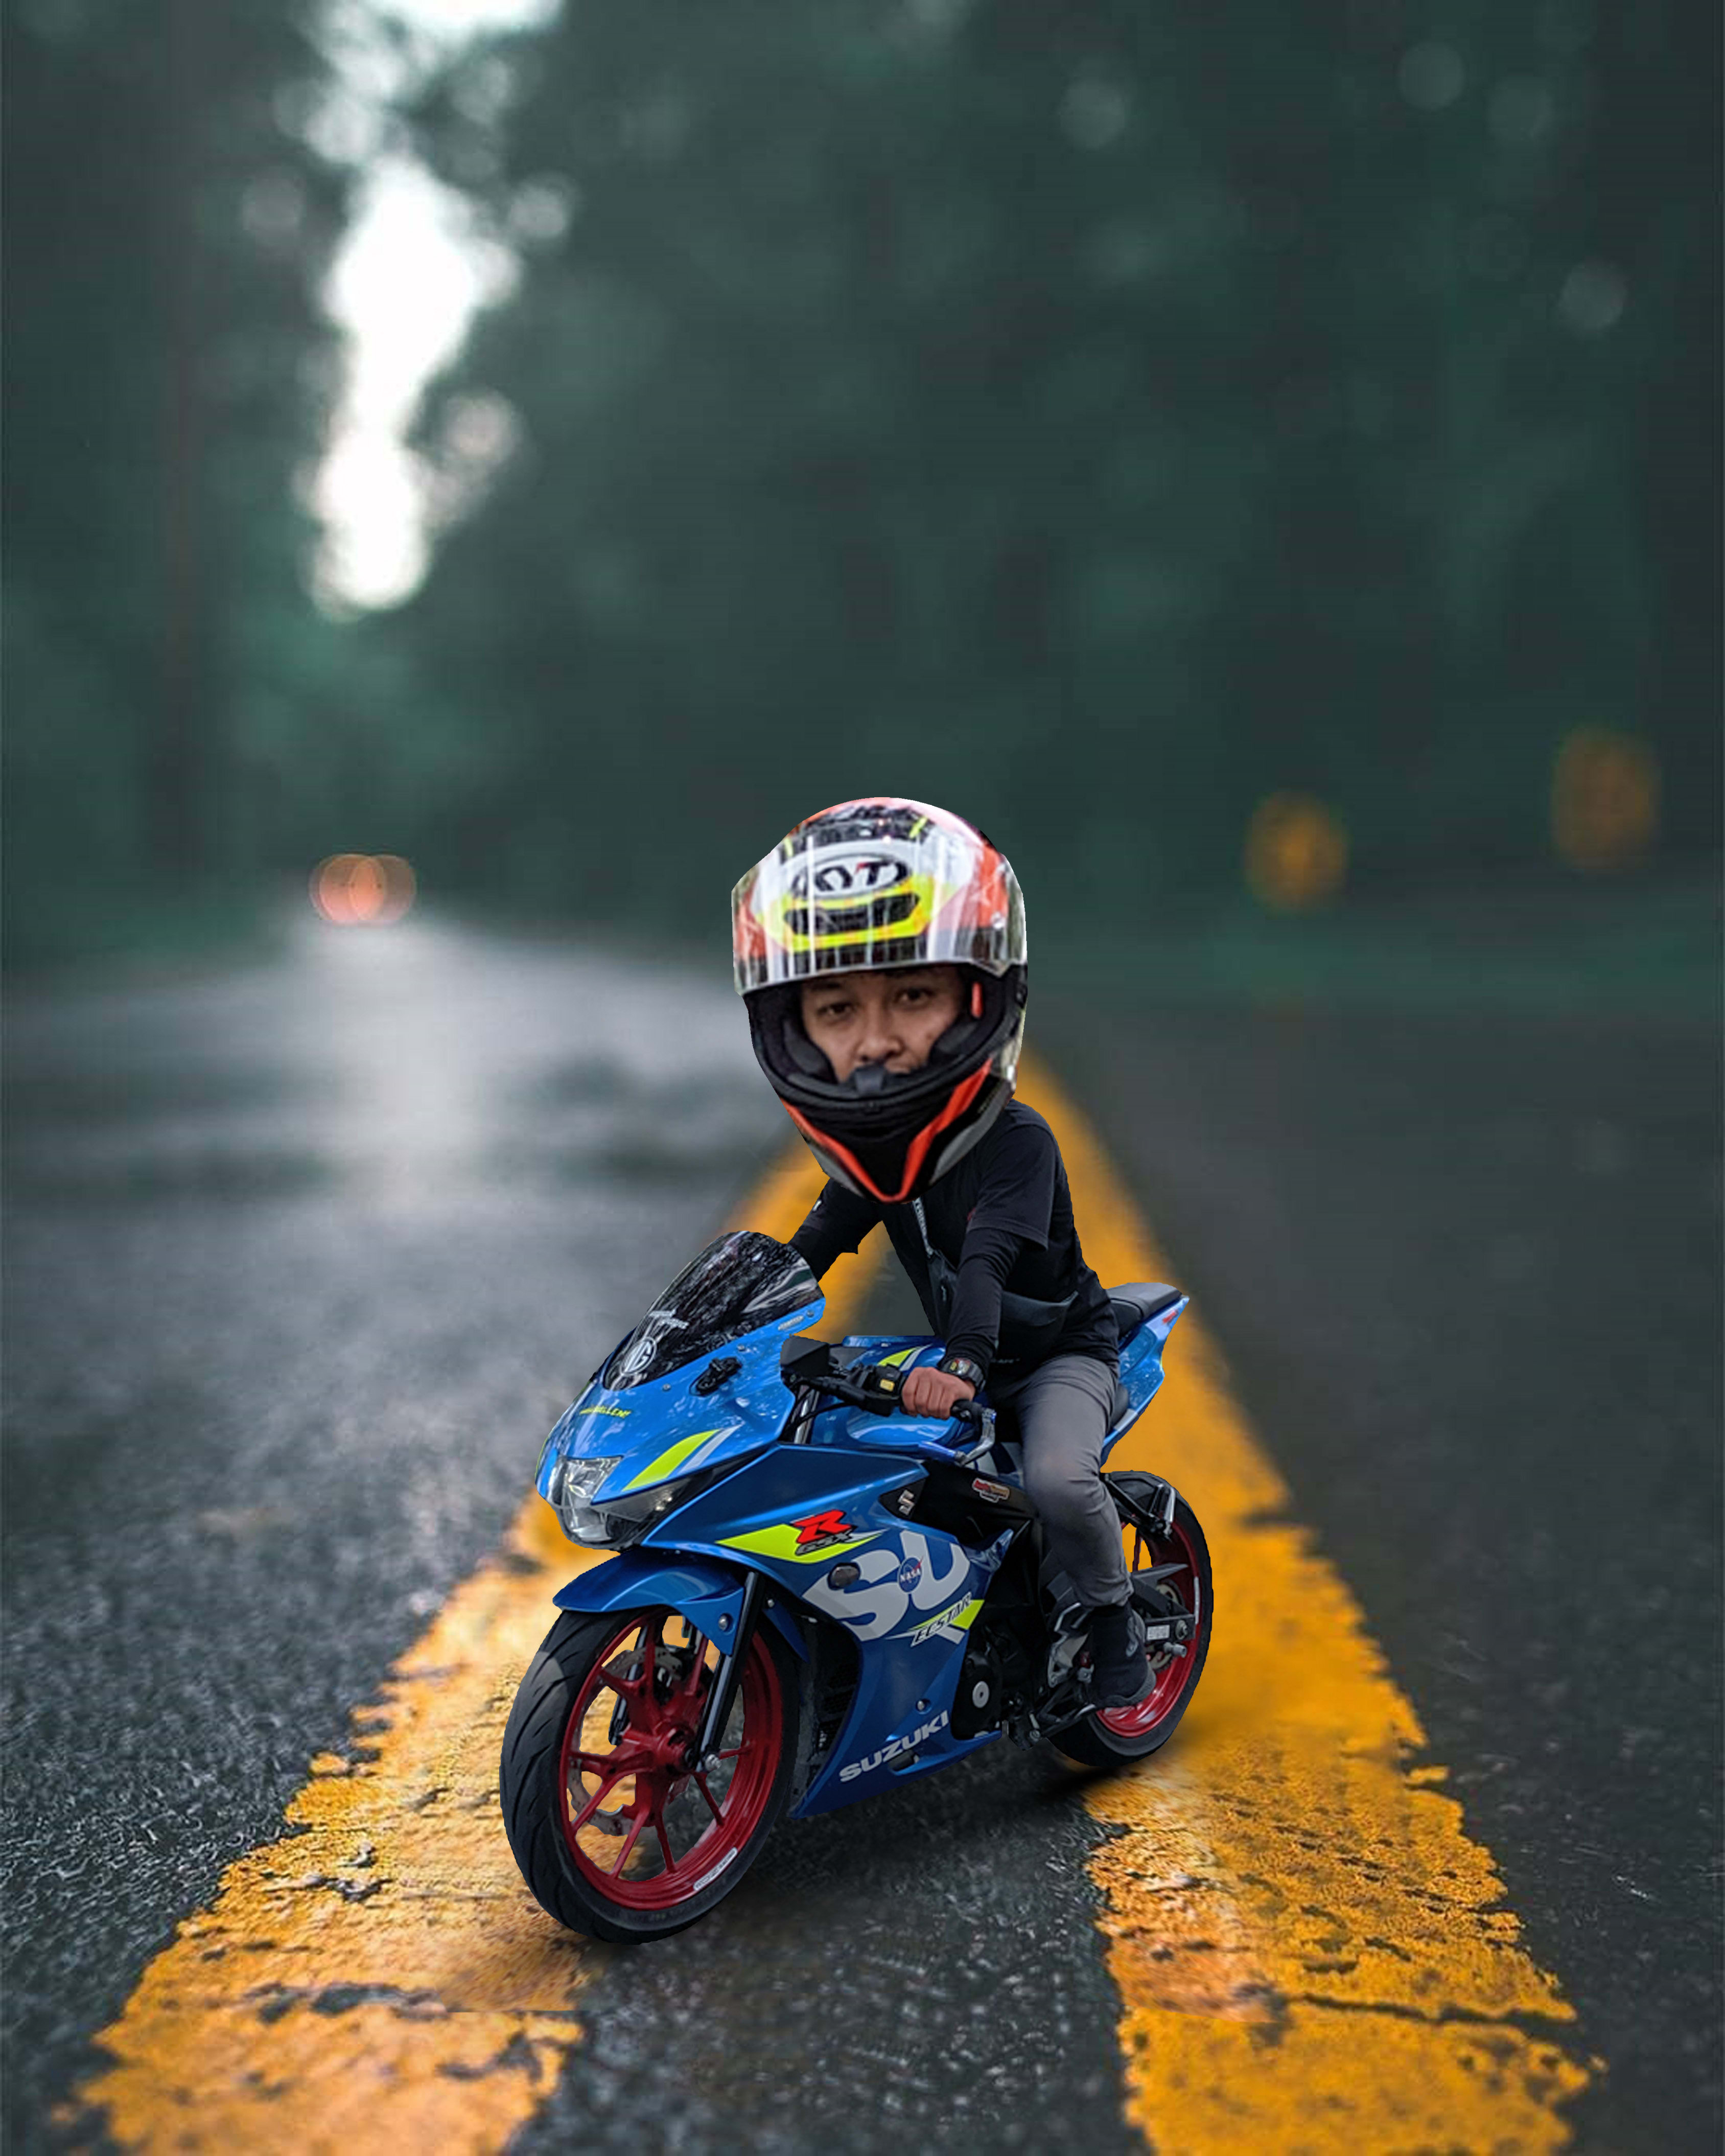 How to Create Moto Miniature In Adobe Photoshop In High Resolution